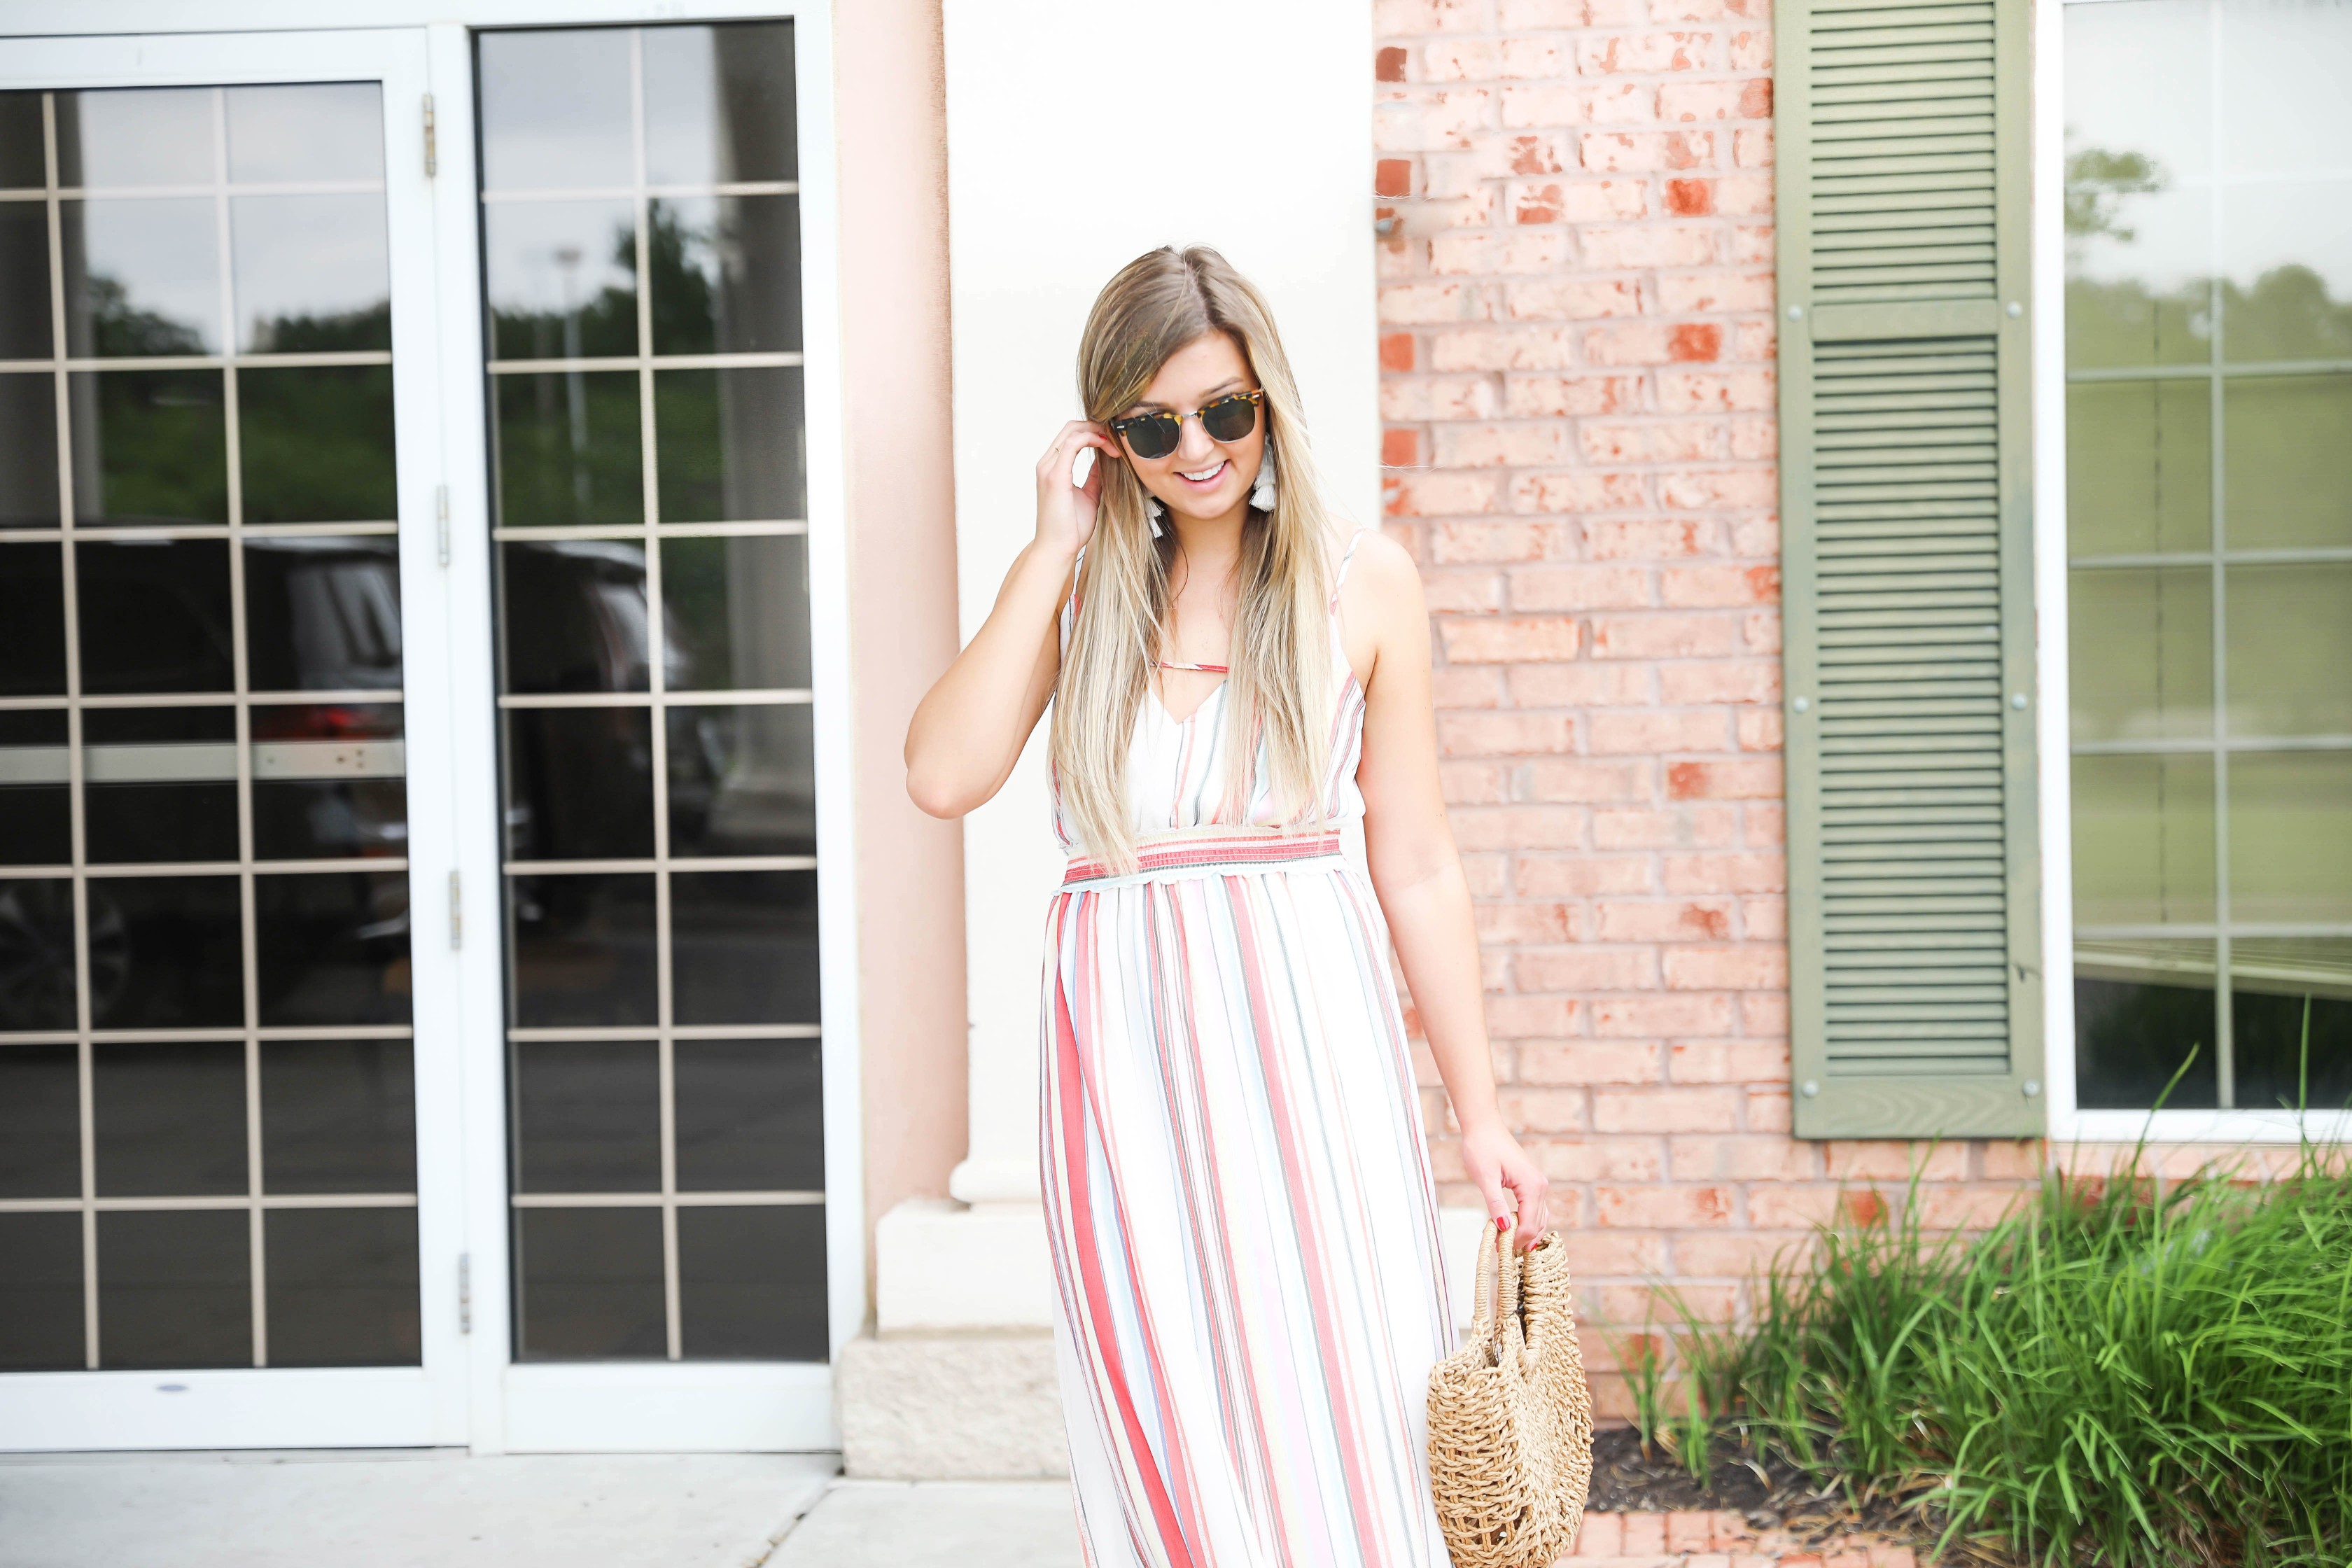 Striped summer maxi dress from revolve! Cute summer fashion and easy outfit ideas! Paired with my favorite straw bag on my blog daily dose of charm by lauren lindmark